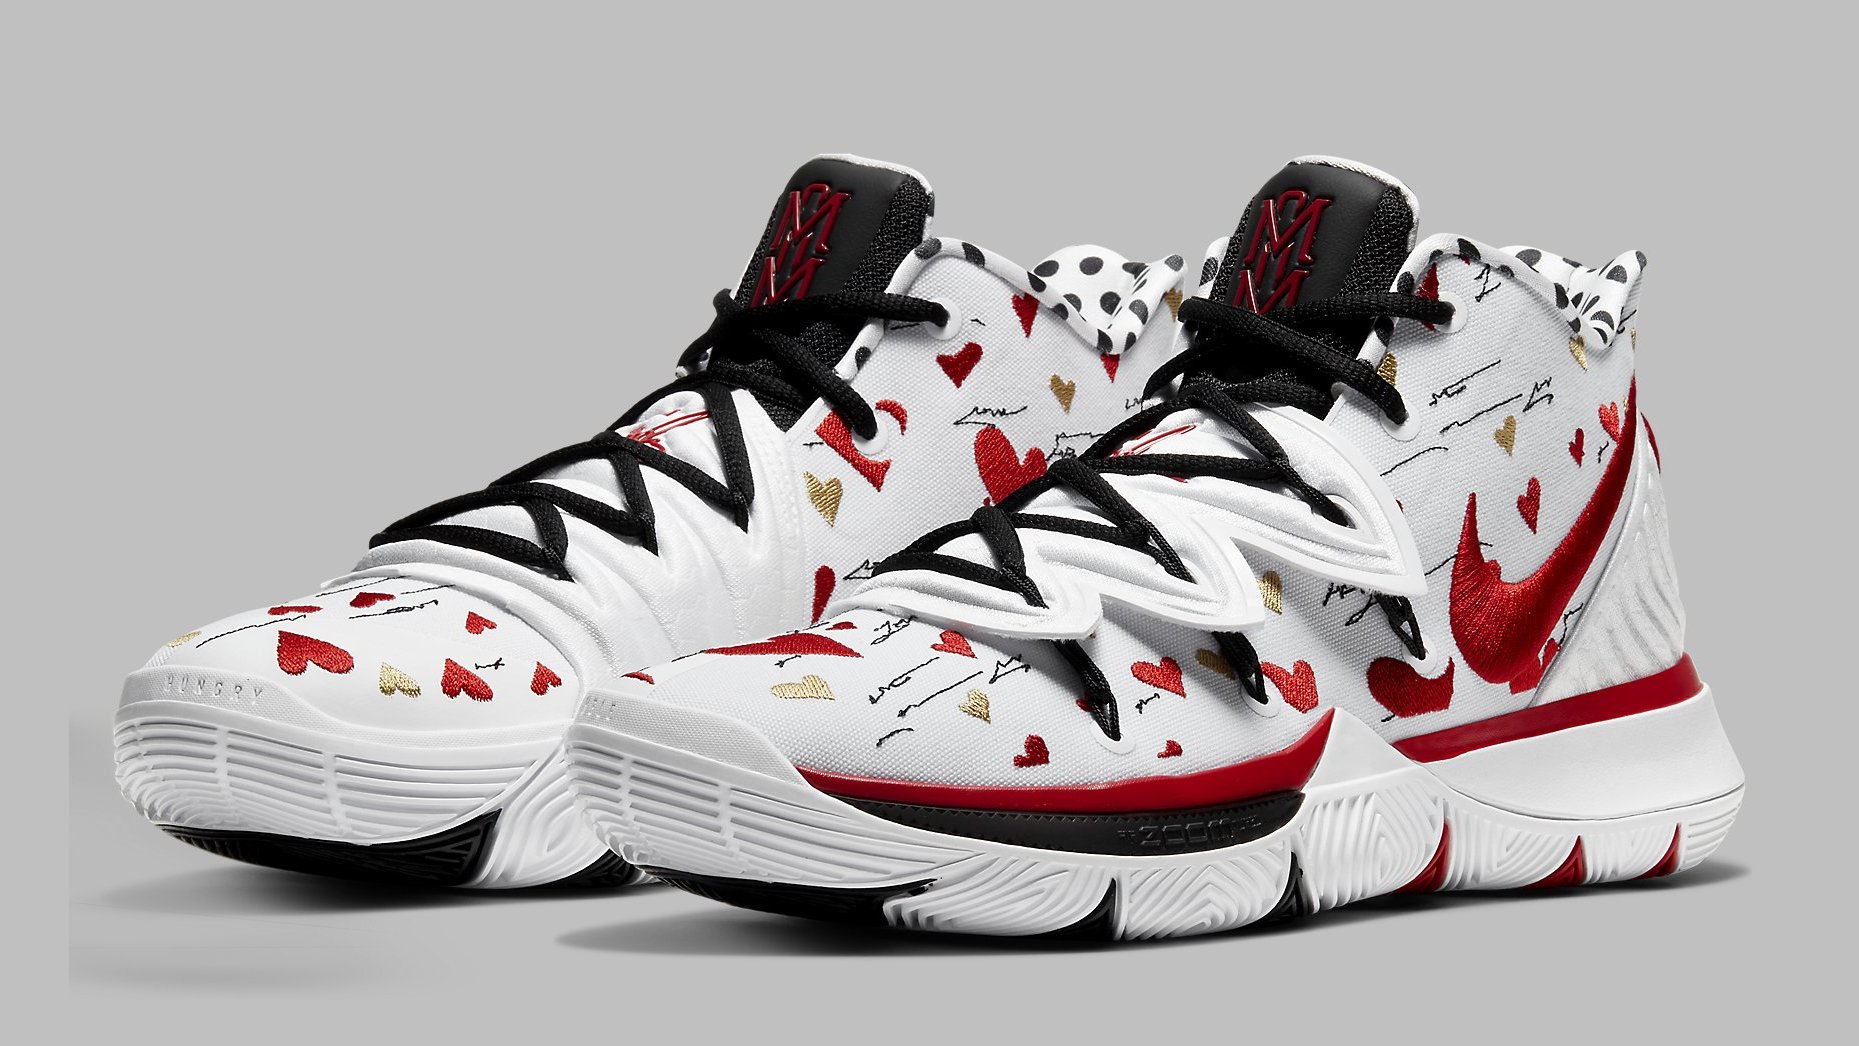 kyrie irving rose shoes